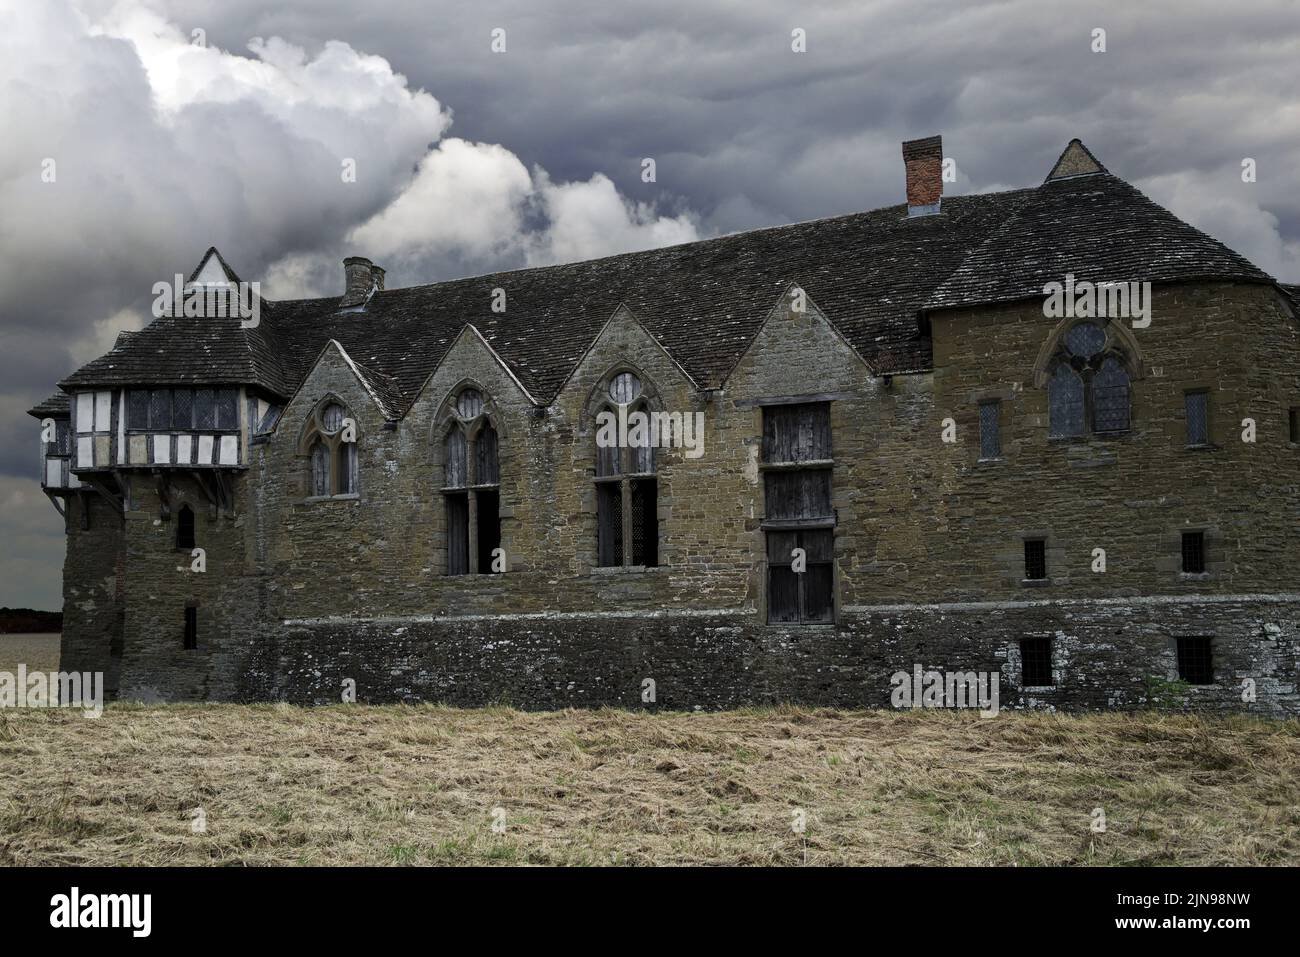 This fantasy image of a spooky house is based on Stokesay Castle in Shropshire which was built in the late 13th century. Stock Photo